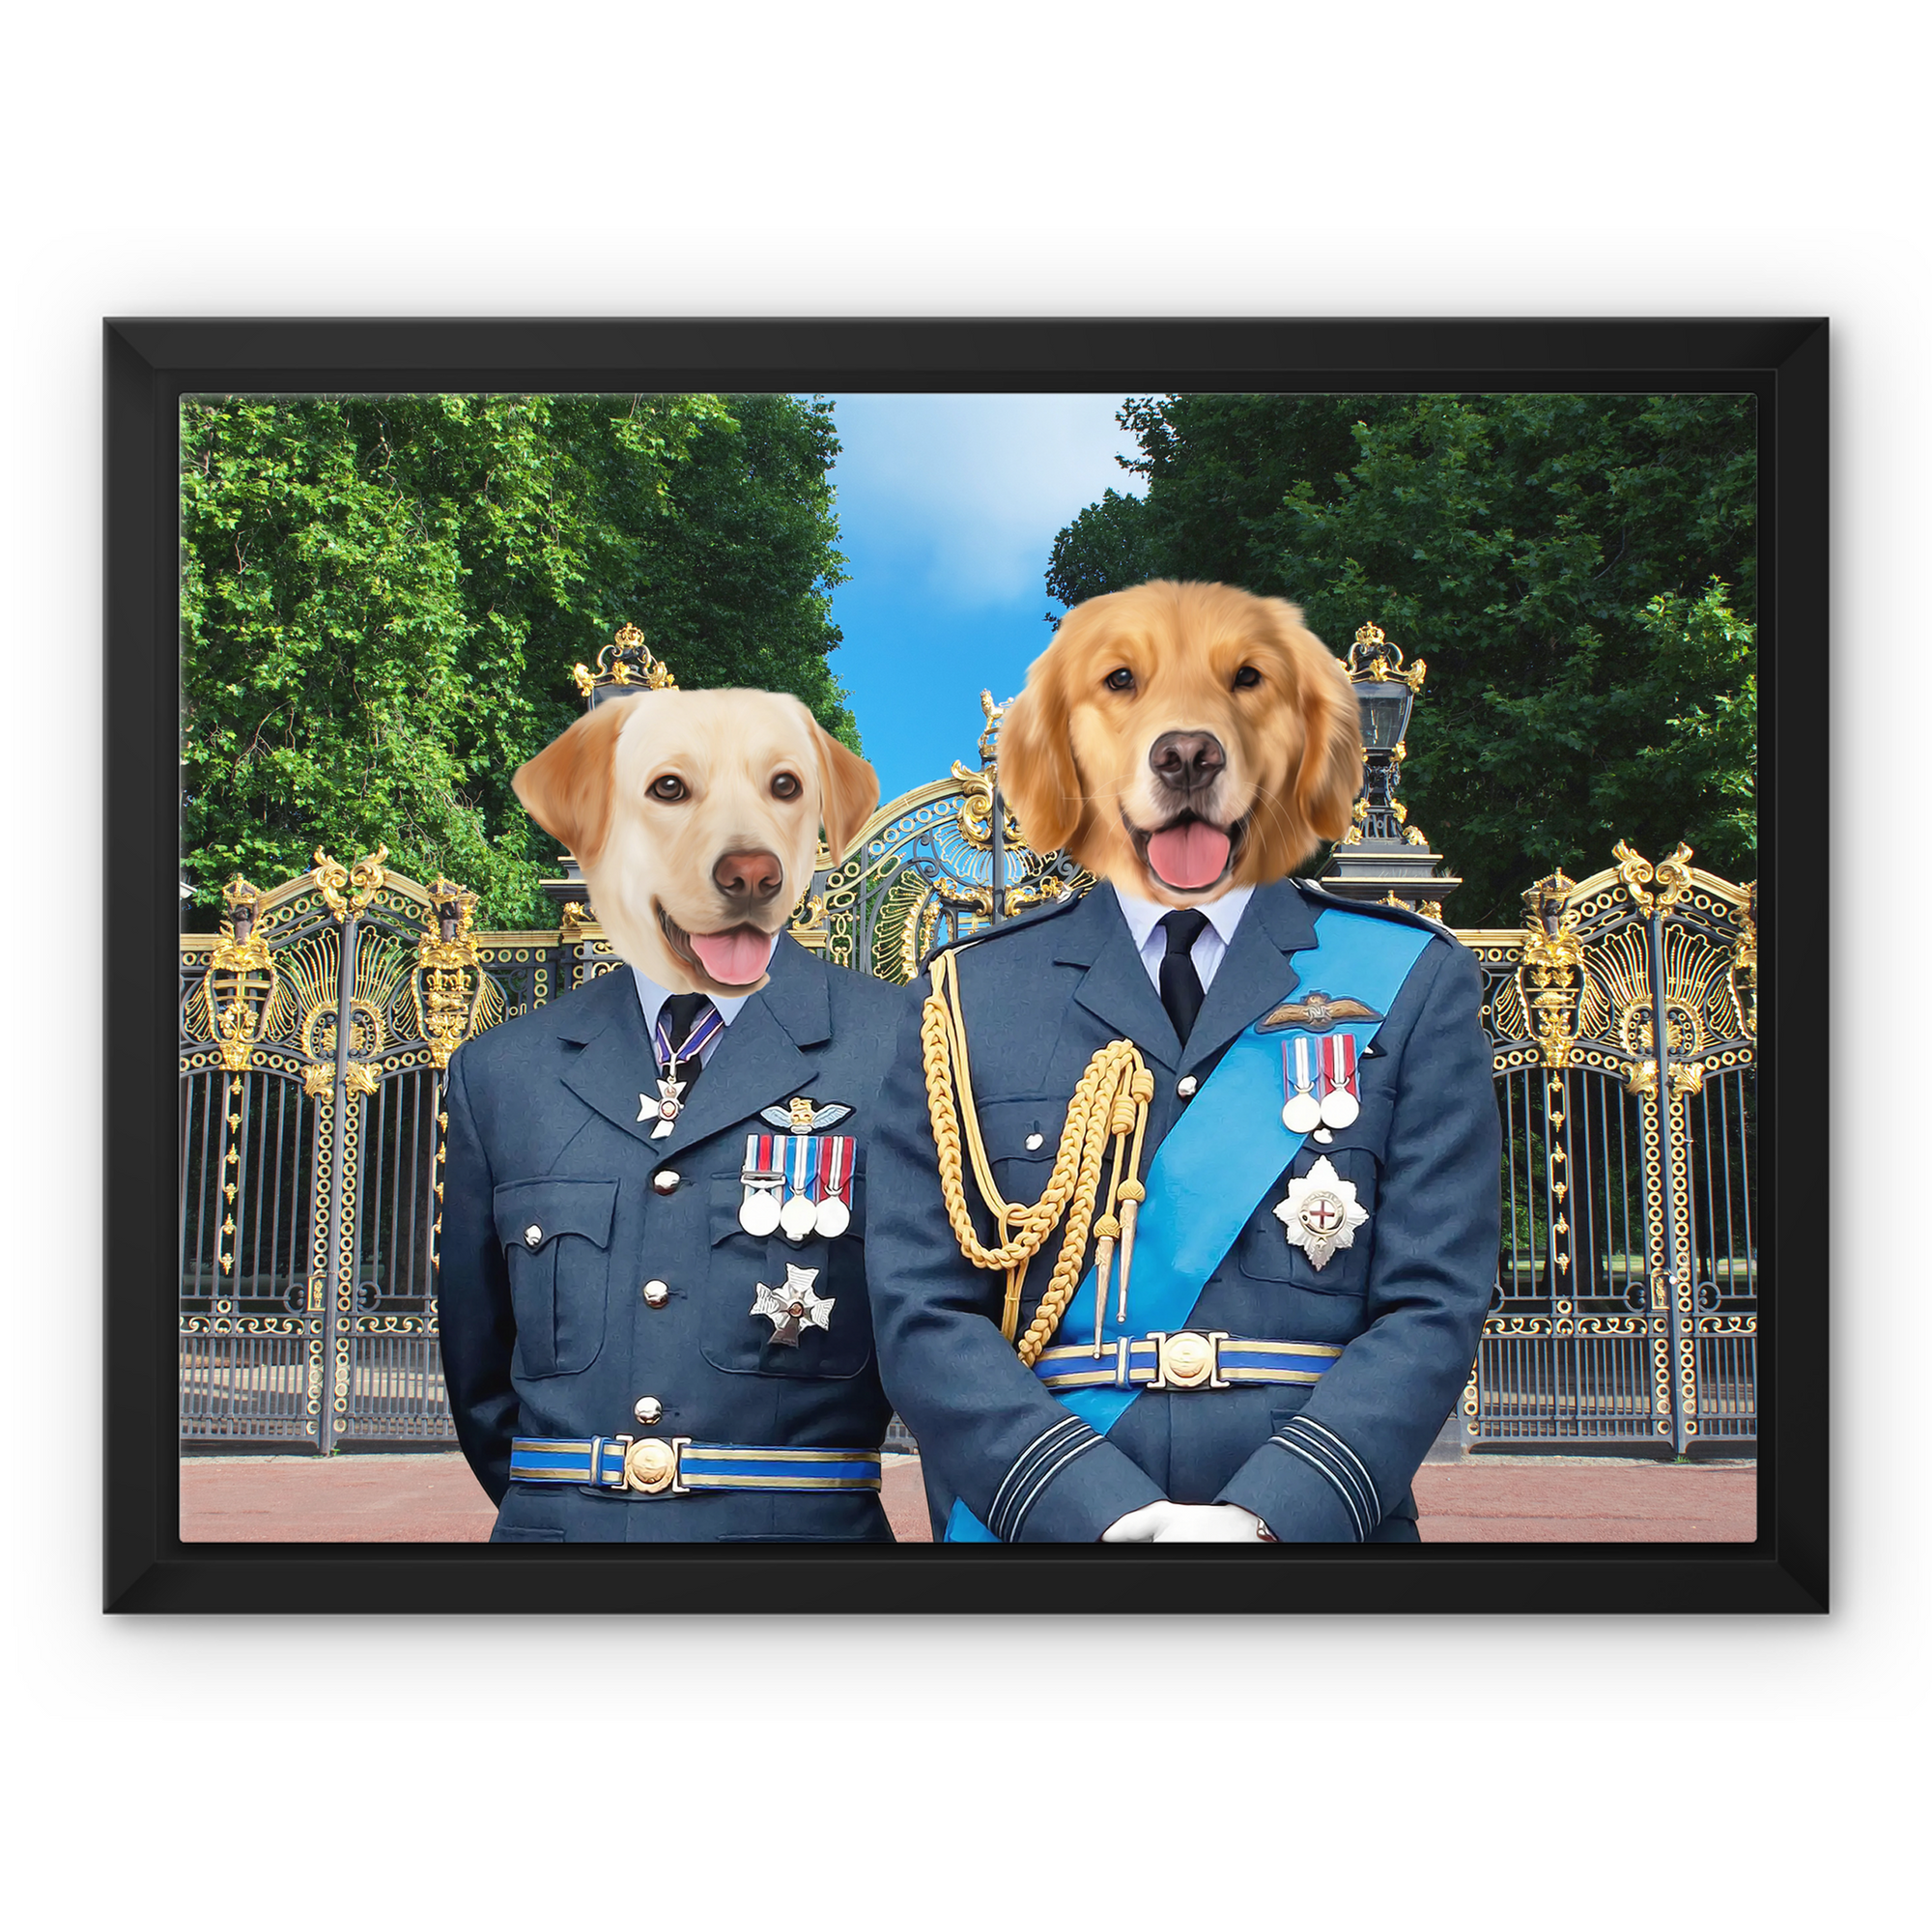 Paw & Glory, paw and glory, animal portrait pictures, dog and owner portraits, best dog paintings, pet photo clothing, custom dog painting, painting of your dog, pet portraits